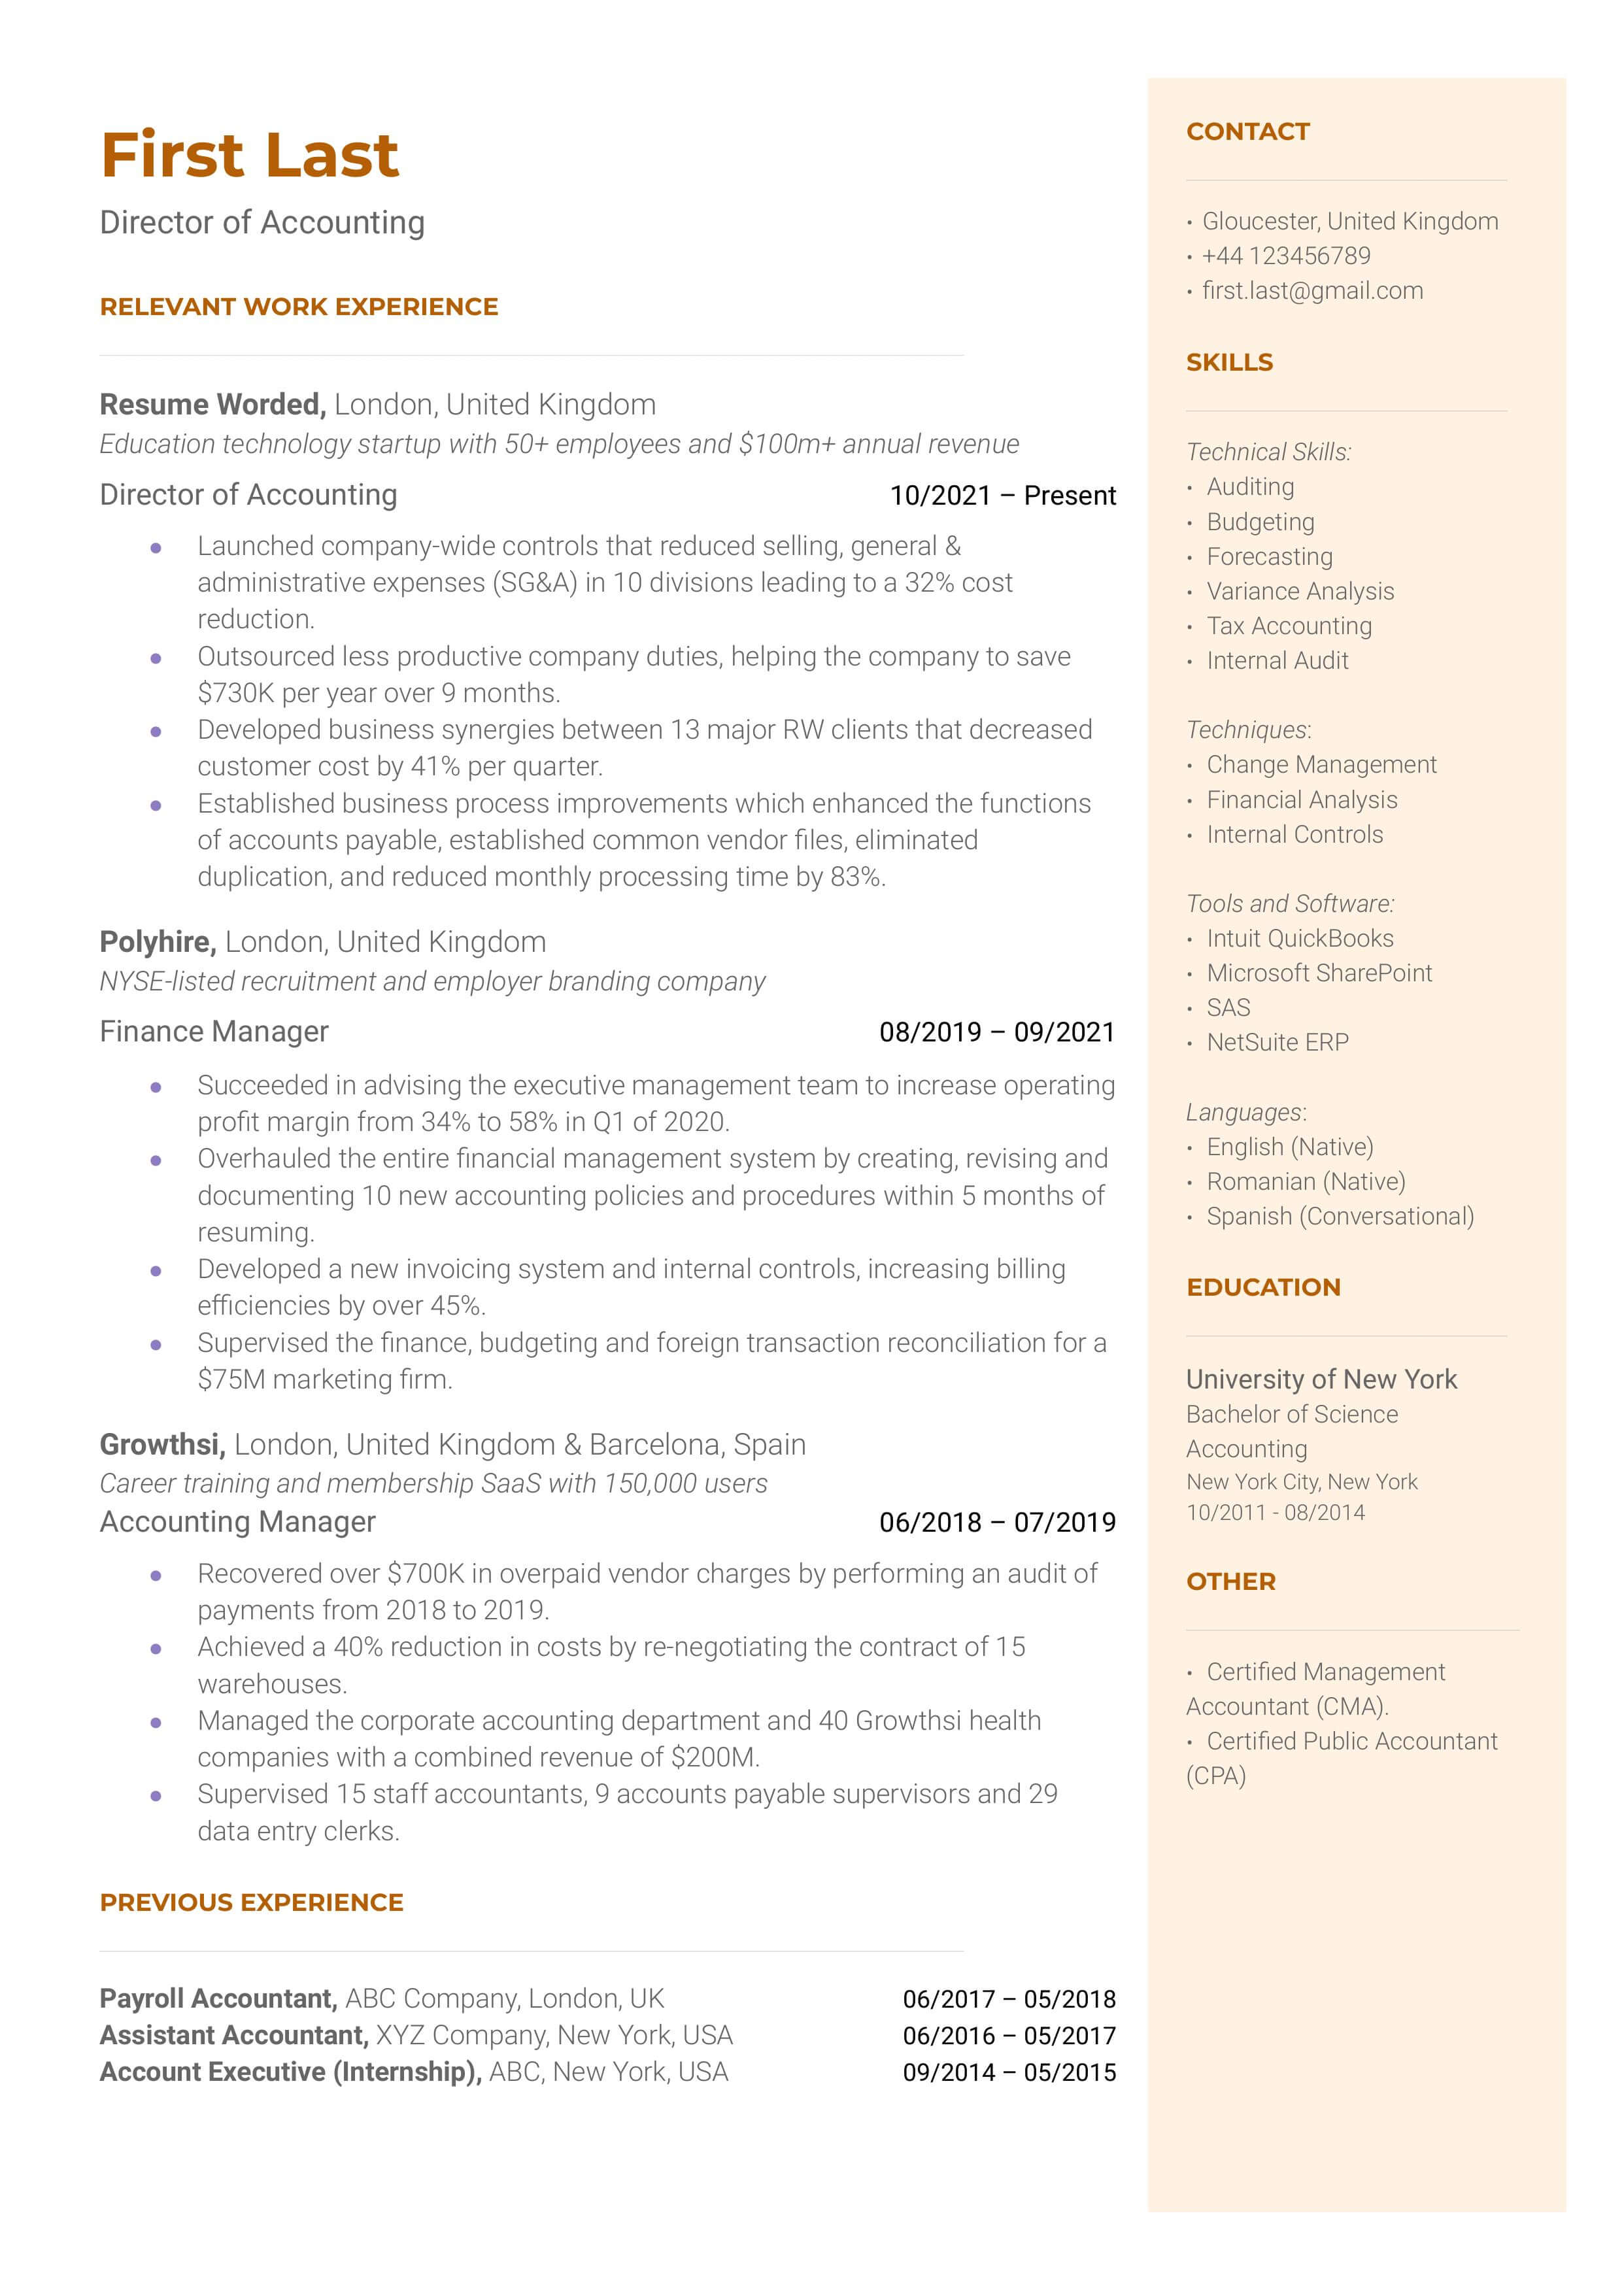 Director of Accounting Resume Sample